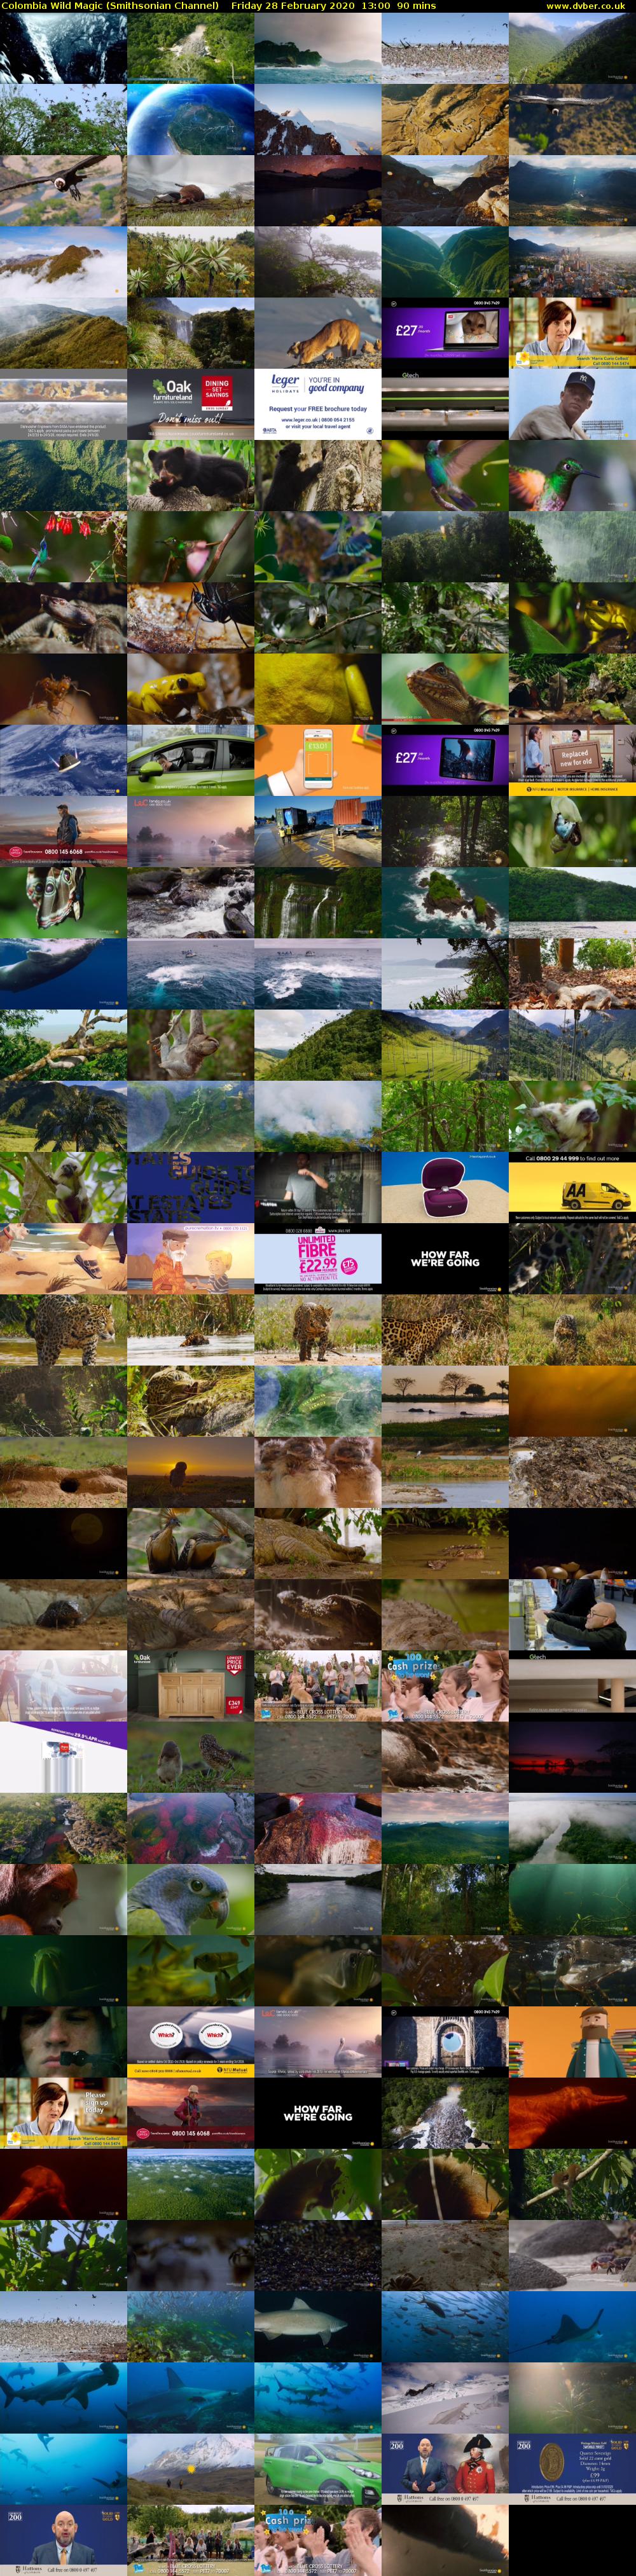 Colombia Wild Magic (Smithsonian Channel) Friday 28 February 2020 13:00 - 14:30